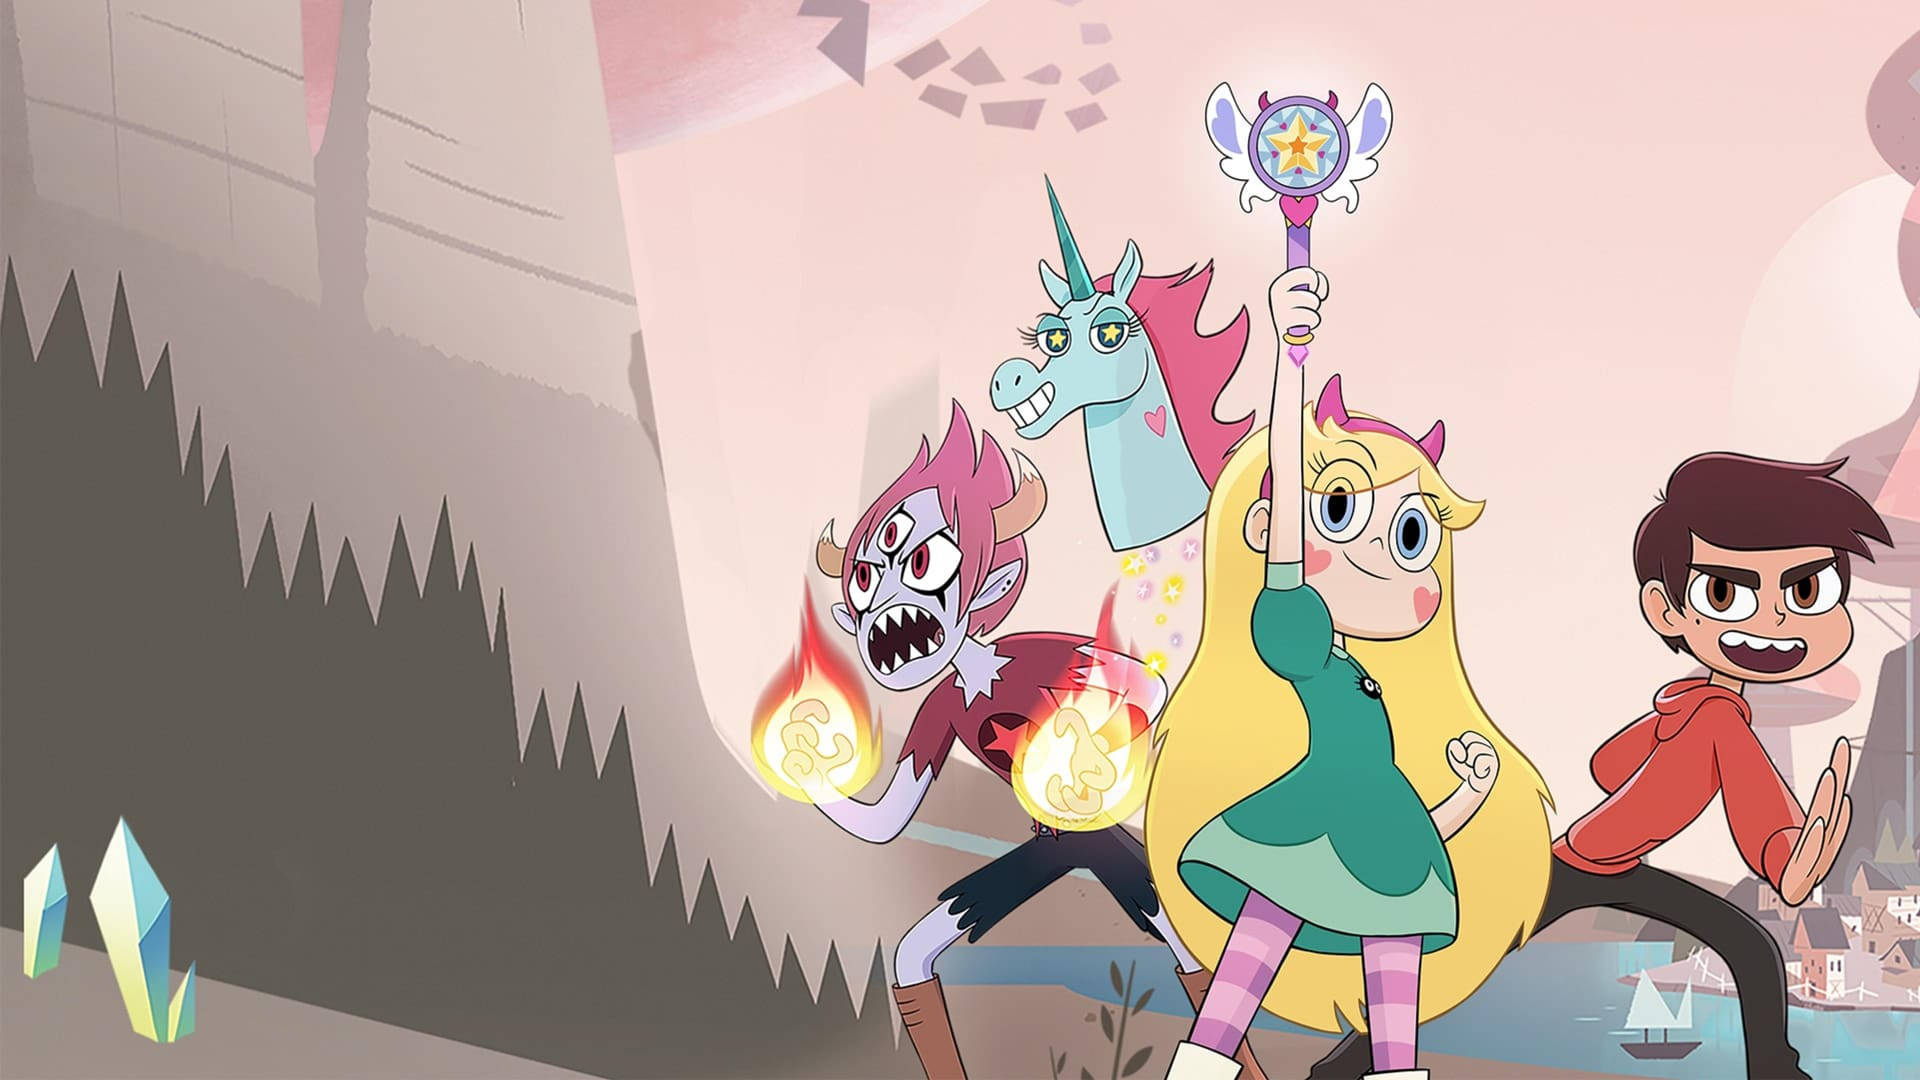 1920x1080 Download Star Vs The Forces Of Evil Wallpaper